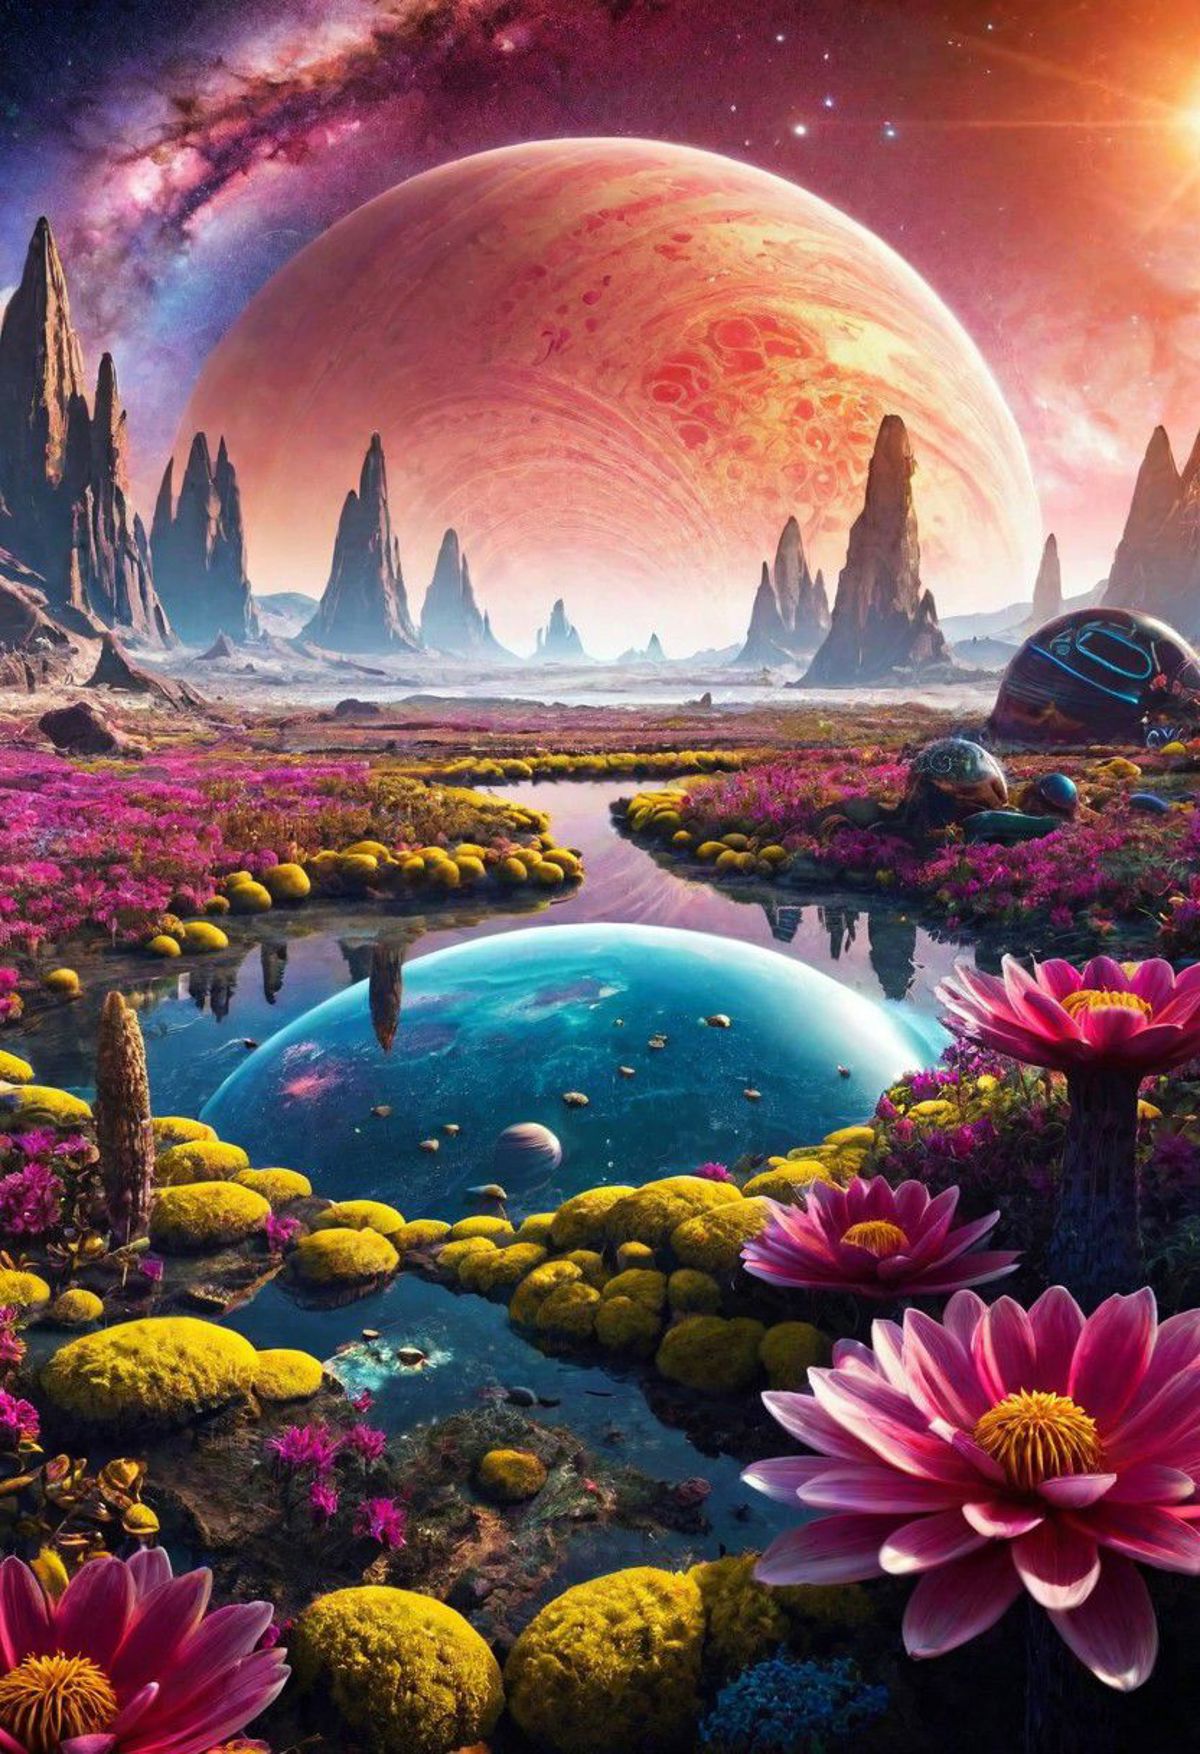 A vibrant alien world with a river, flowers, and massive planetary bodies in the background.